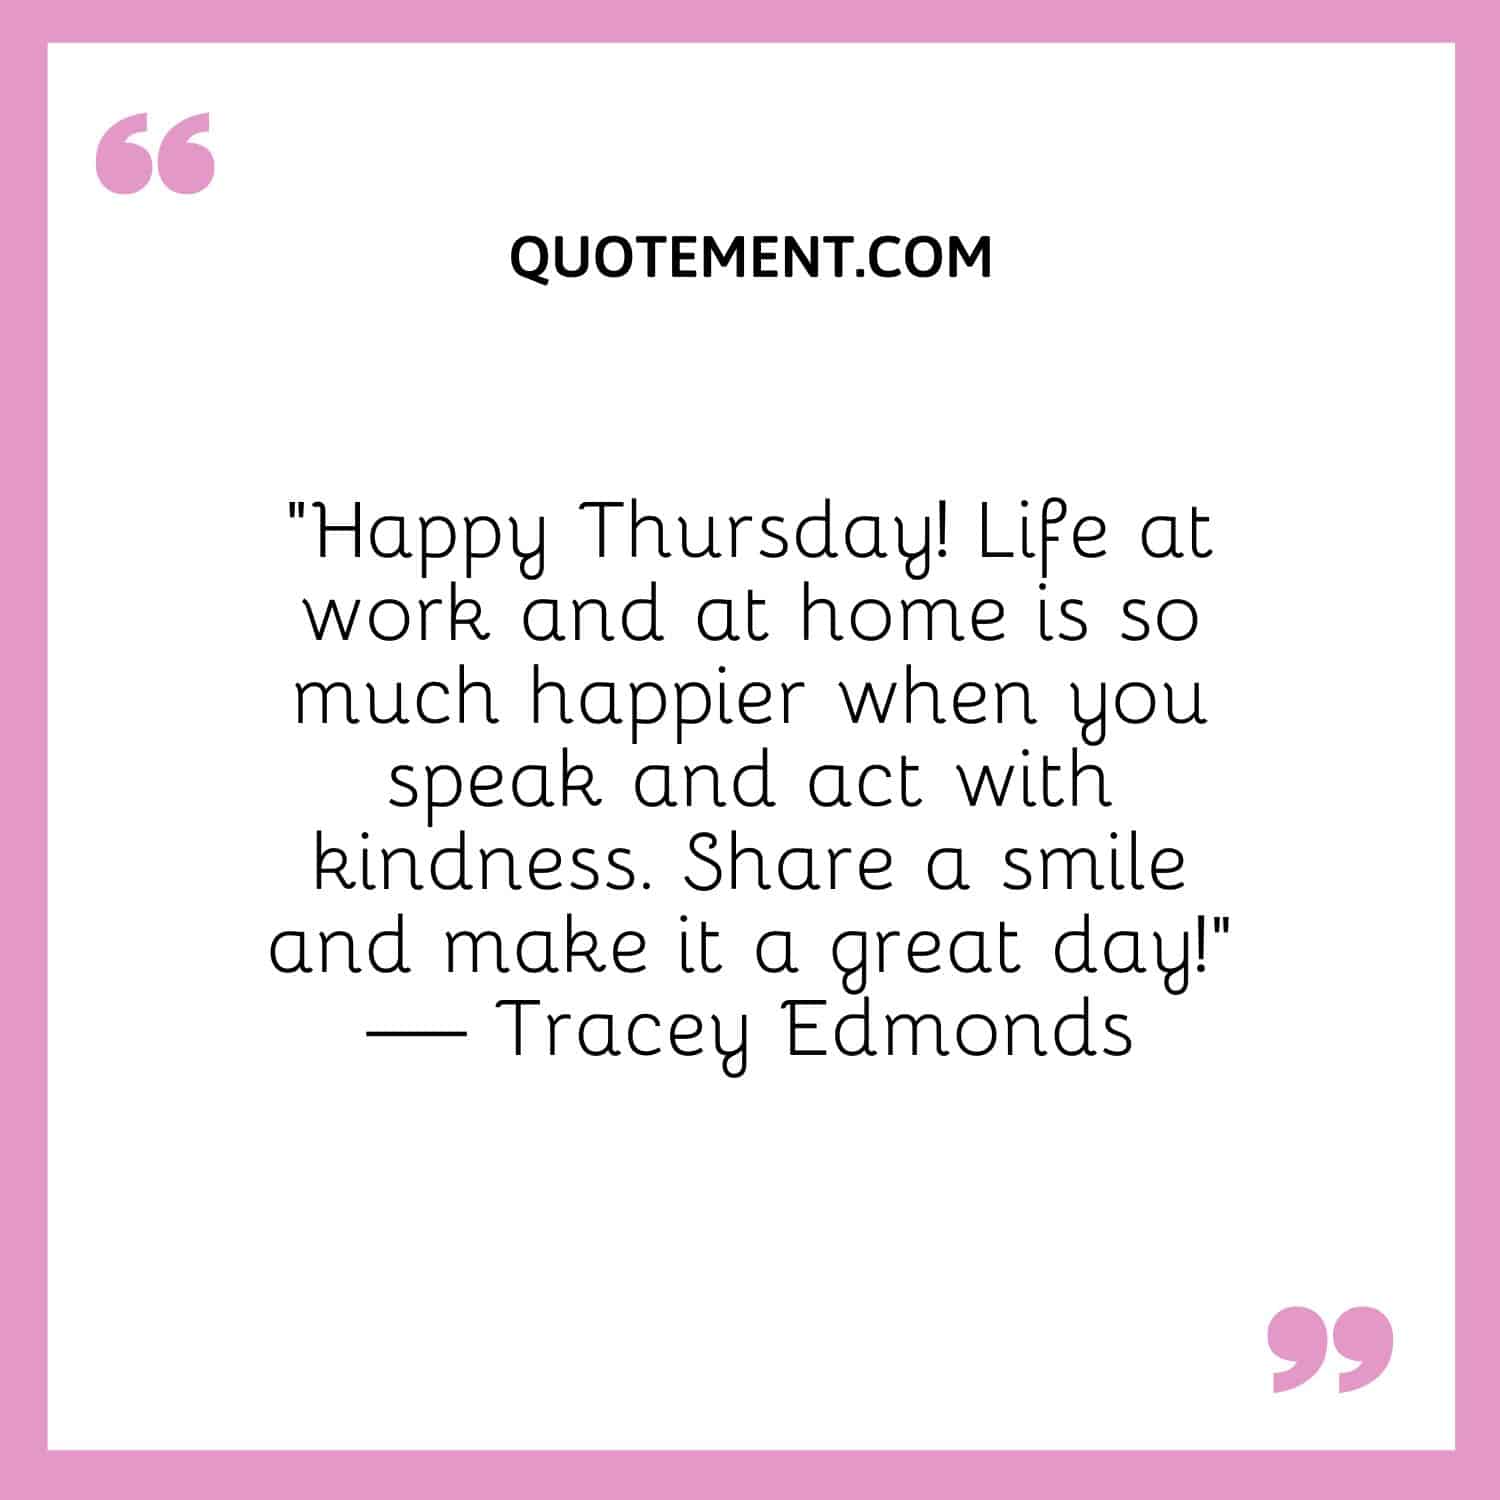 “Happy Thursday! Life at work and at home is so much happier when you speak and act with kindness. Share a smile and make it a great day!” — Tracey Edmonds